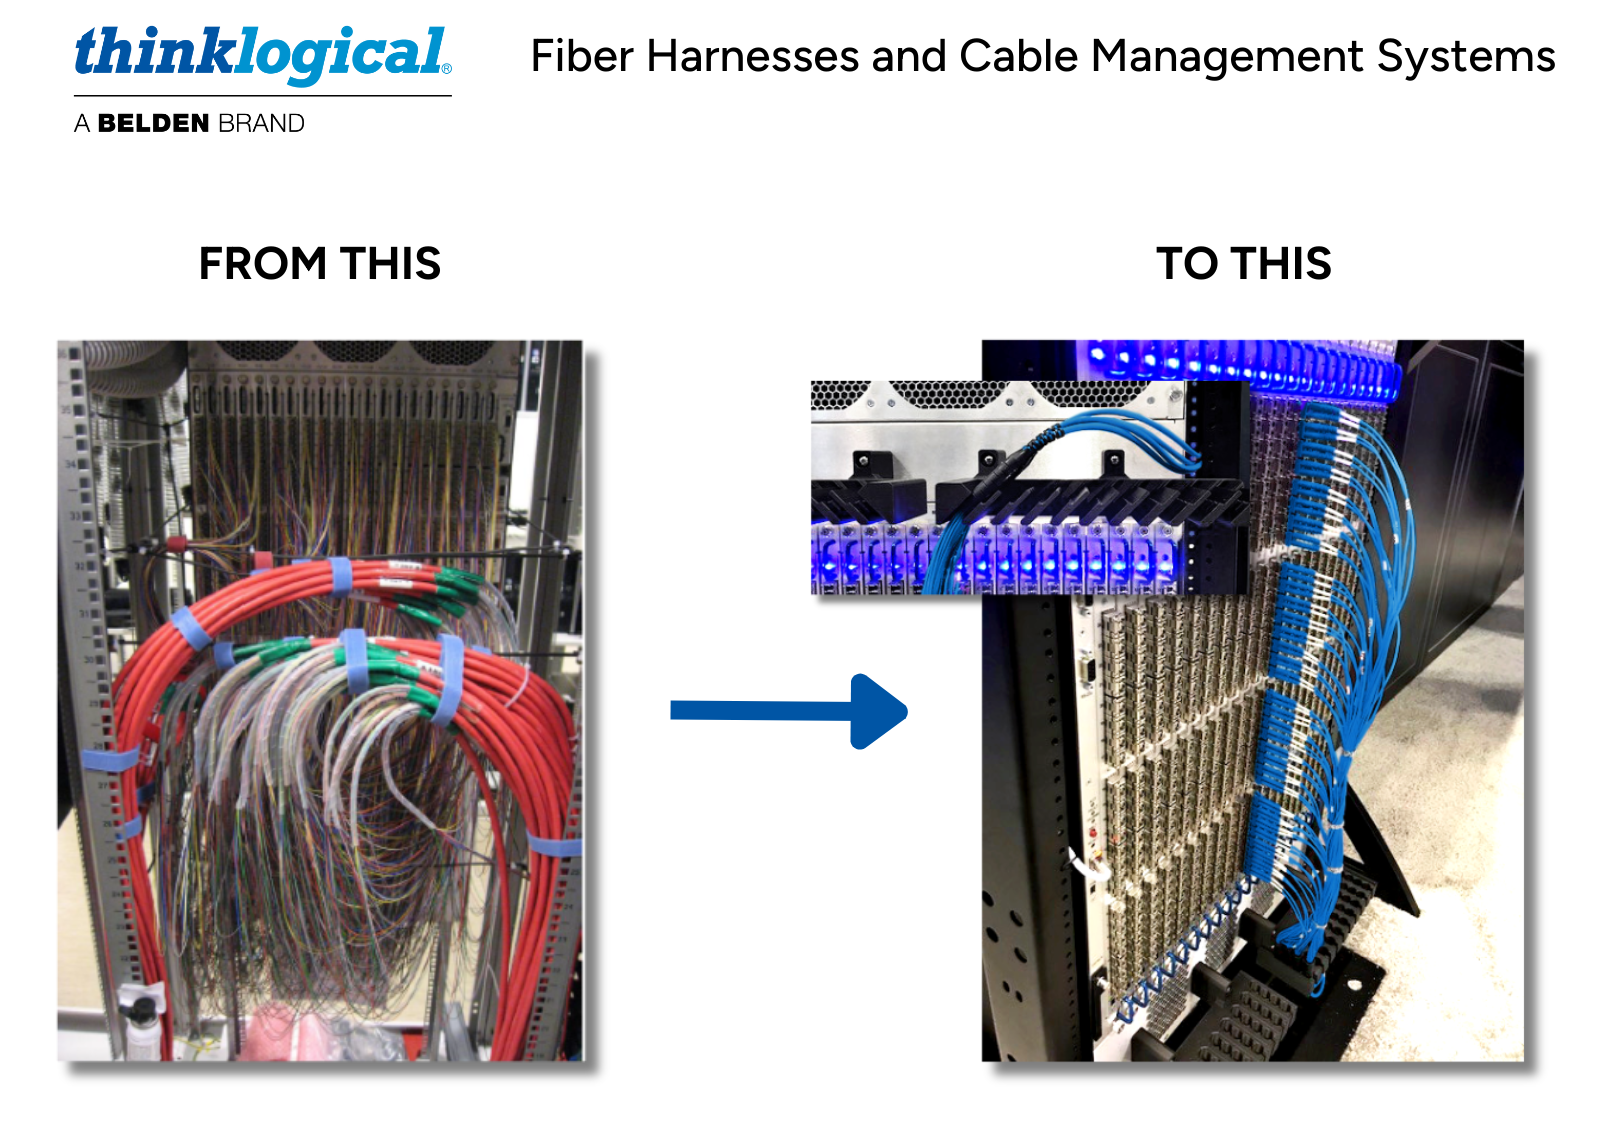 https://www.thinklogical.com/wp-content/uploads/2021/05/TL-FiberHarness-Cable-Management-System.png